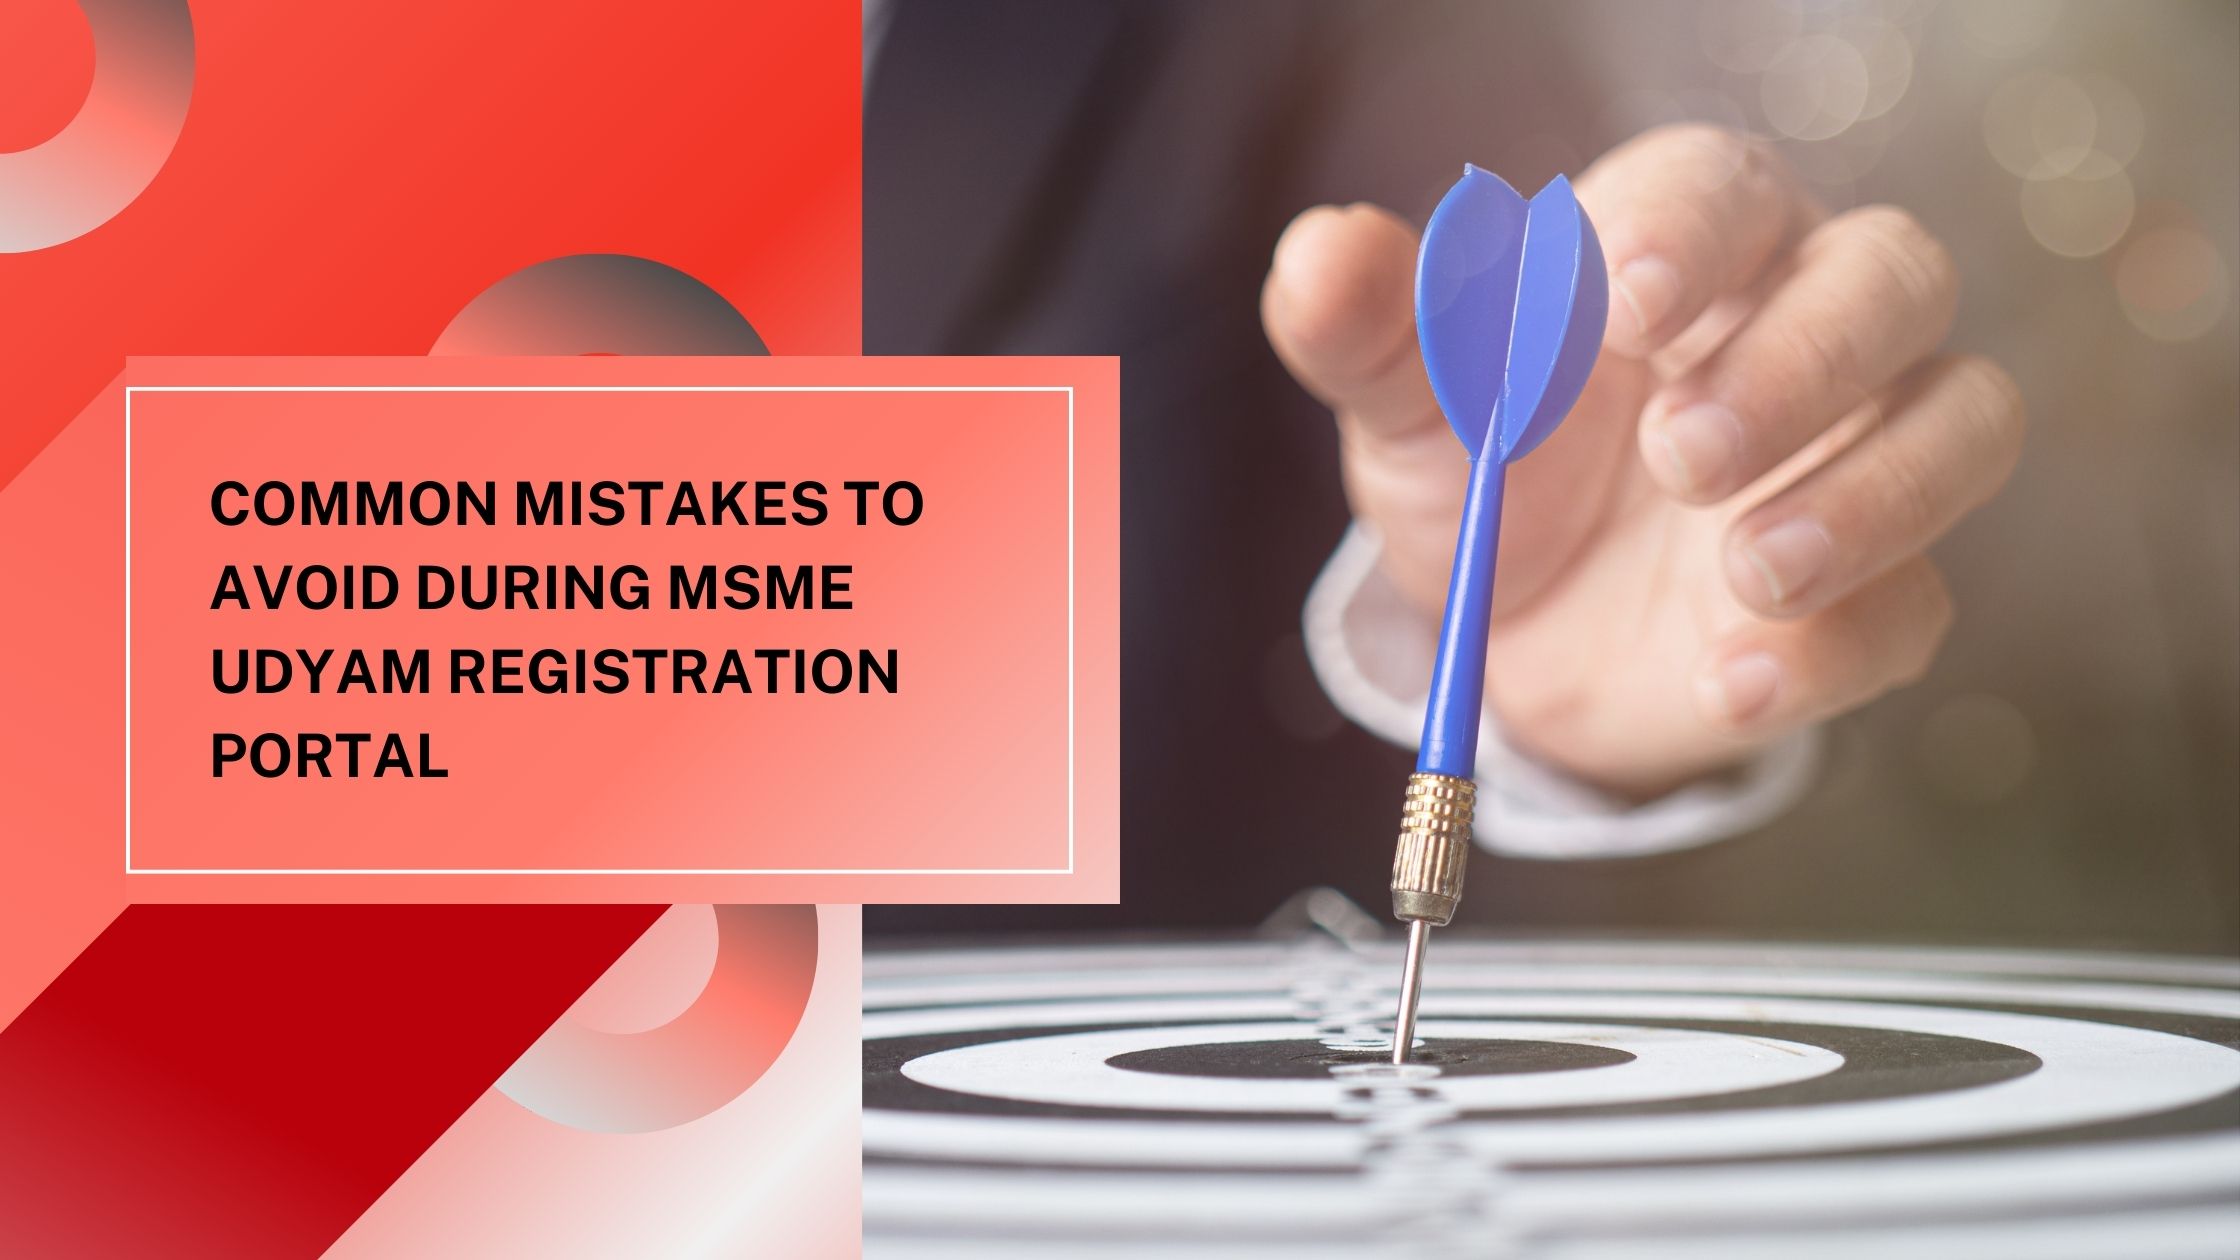 Common Mistakes to Avoid During MSME Udyam Registration Portal